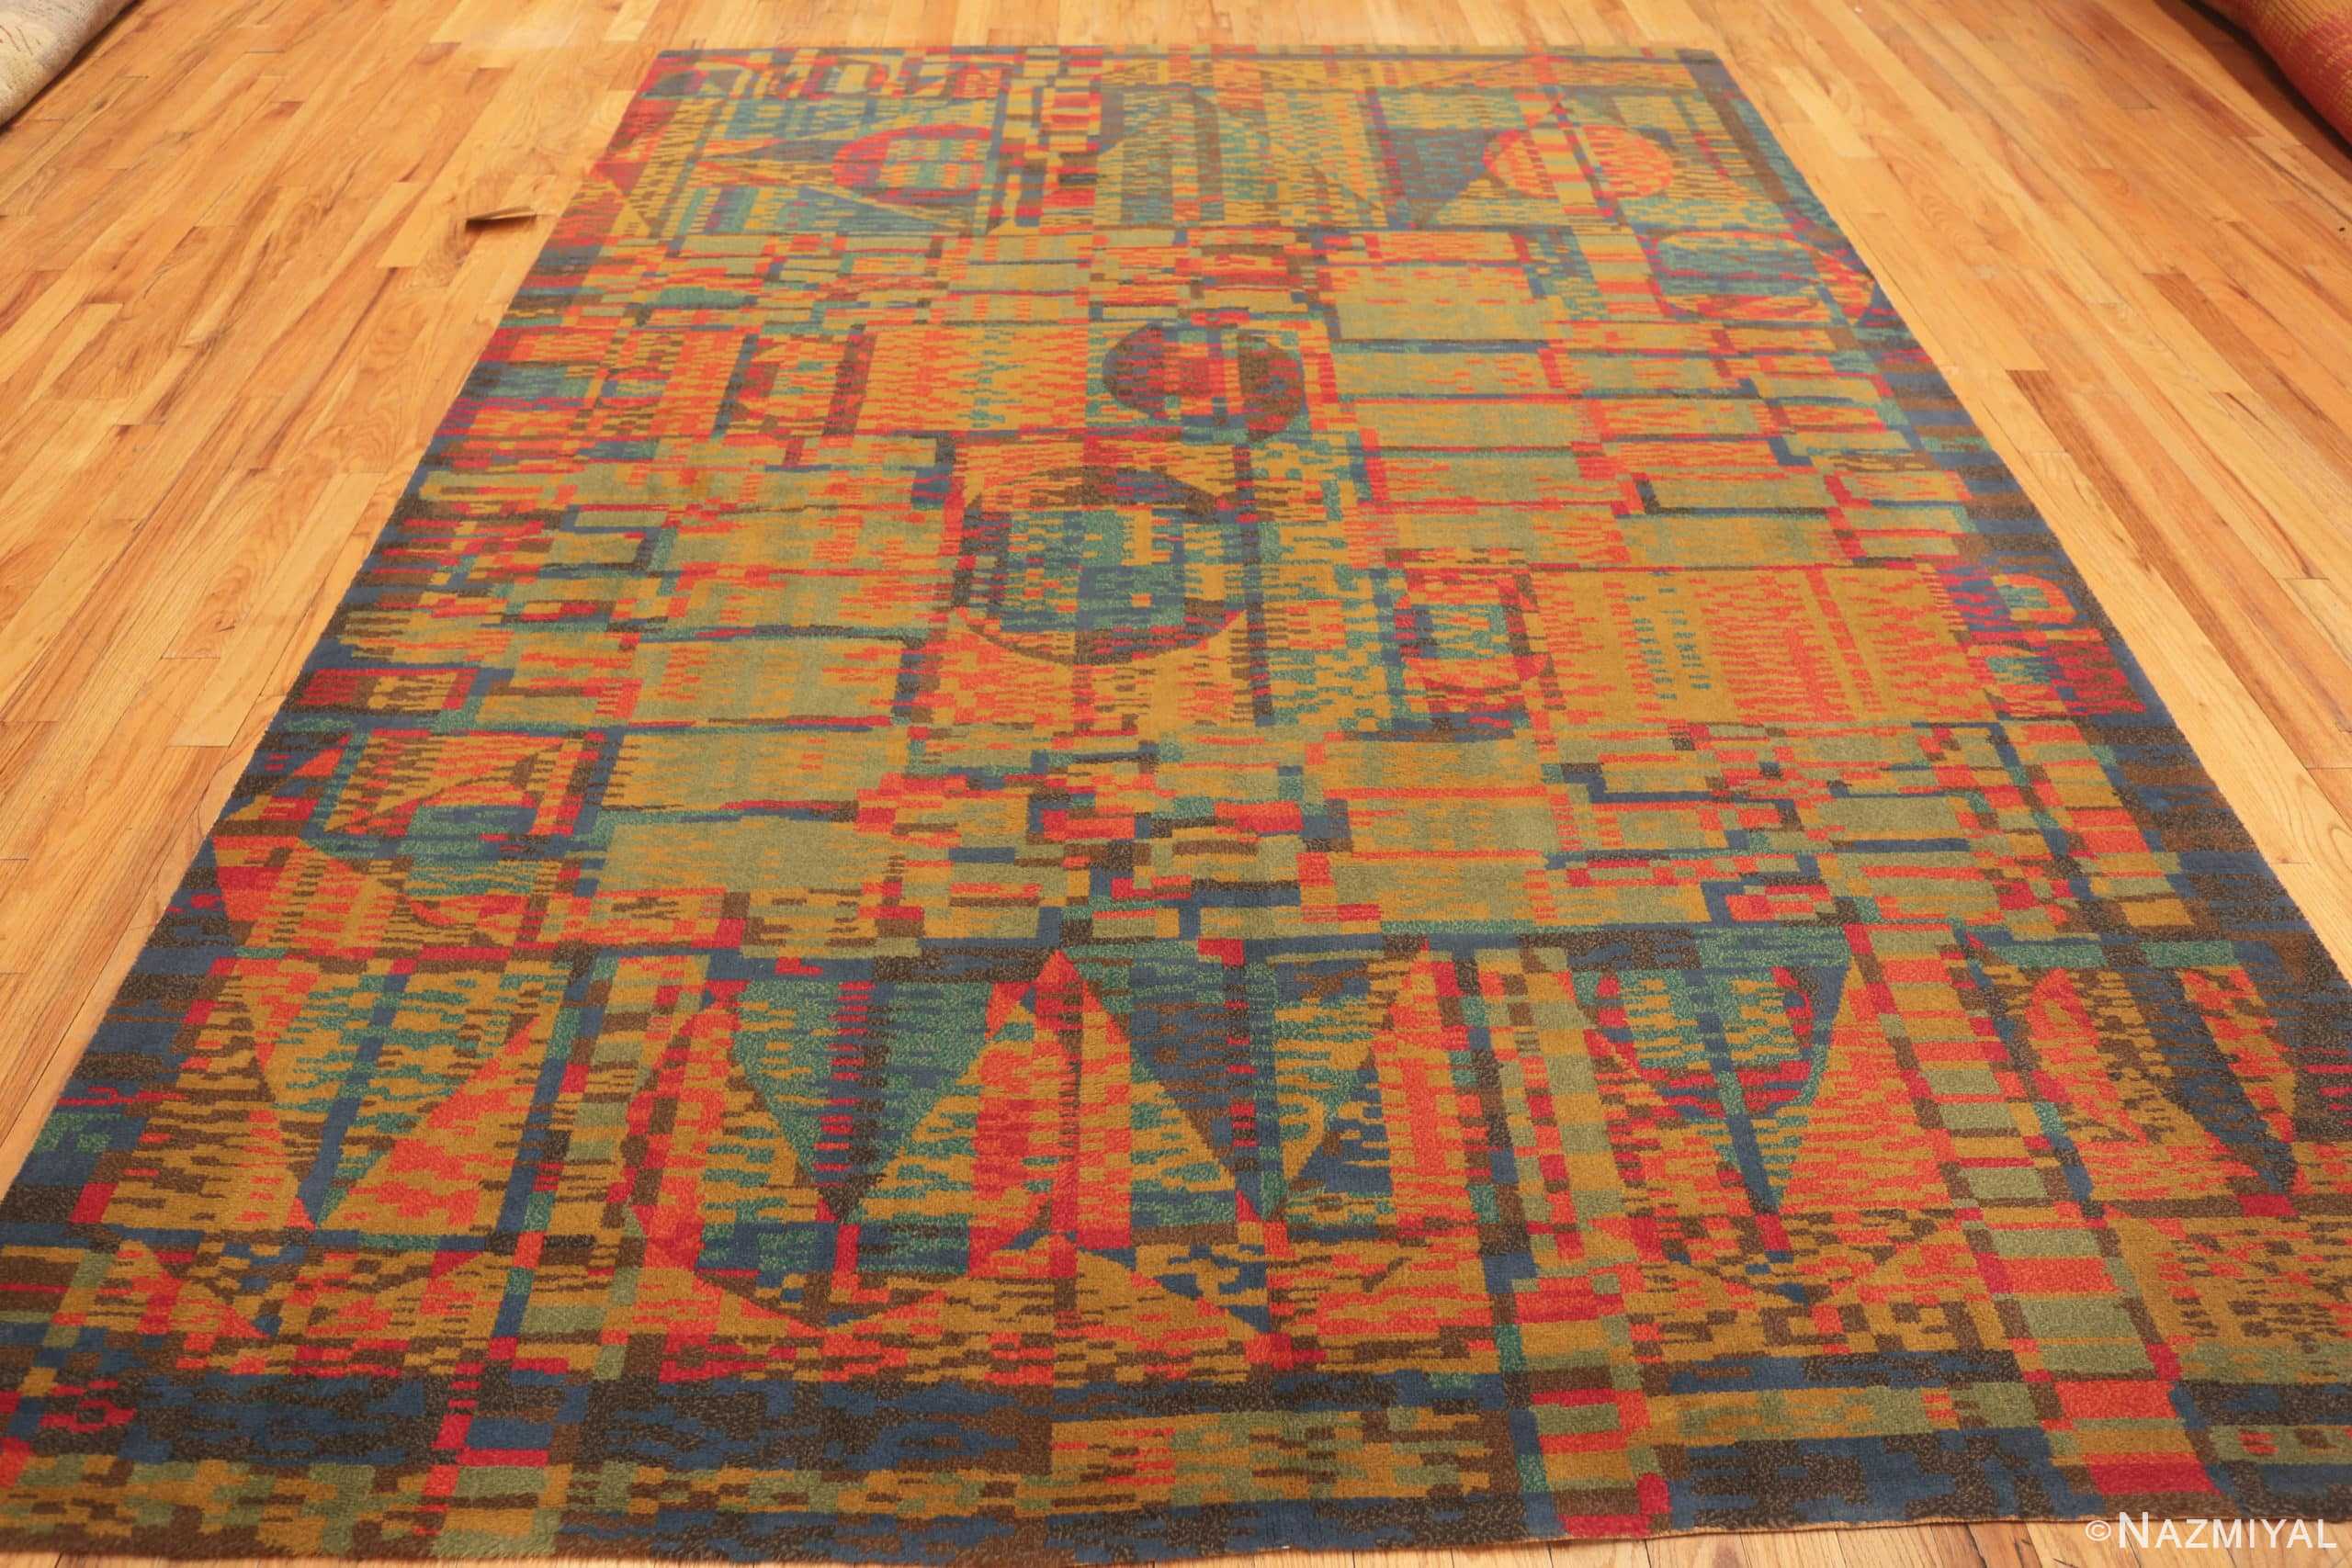 Whole View Of Vintage Scandinavian Swedish Rug 71444 by Nazmiyal Antique Rugs